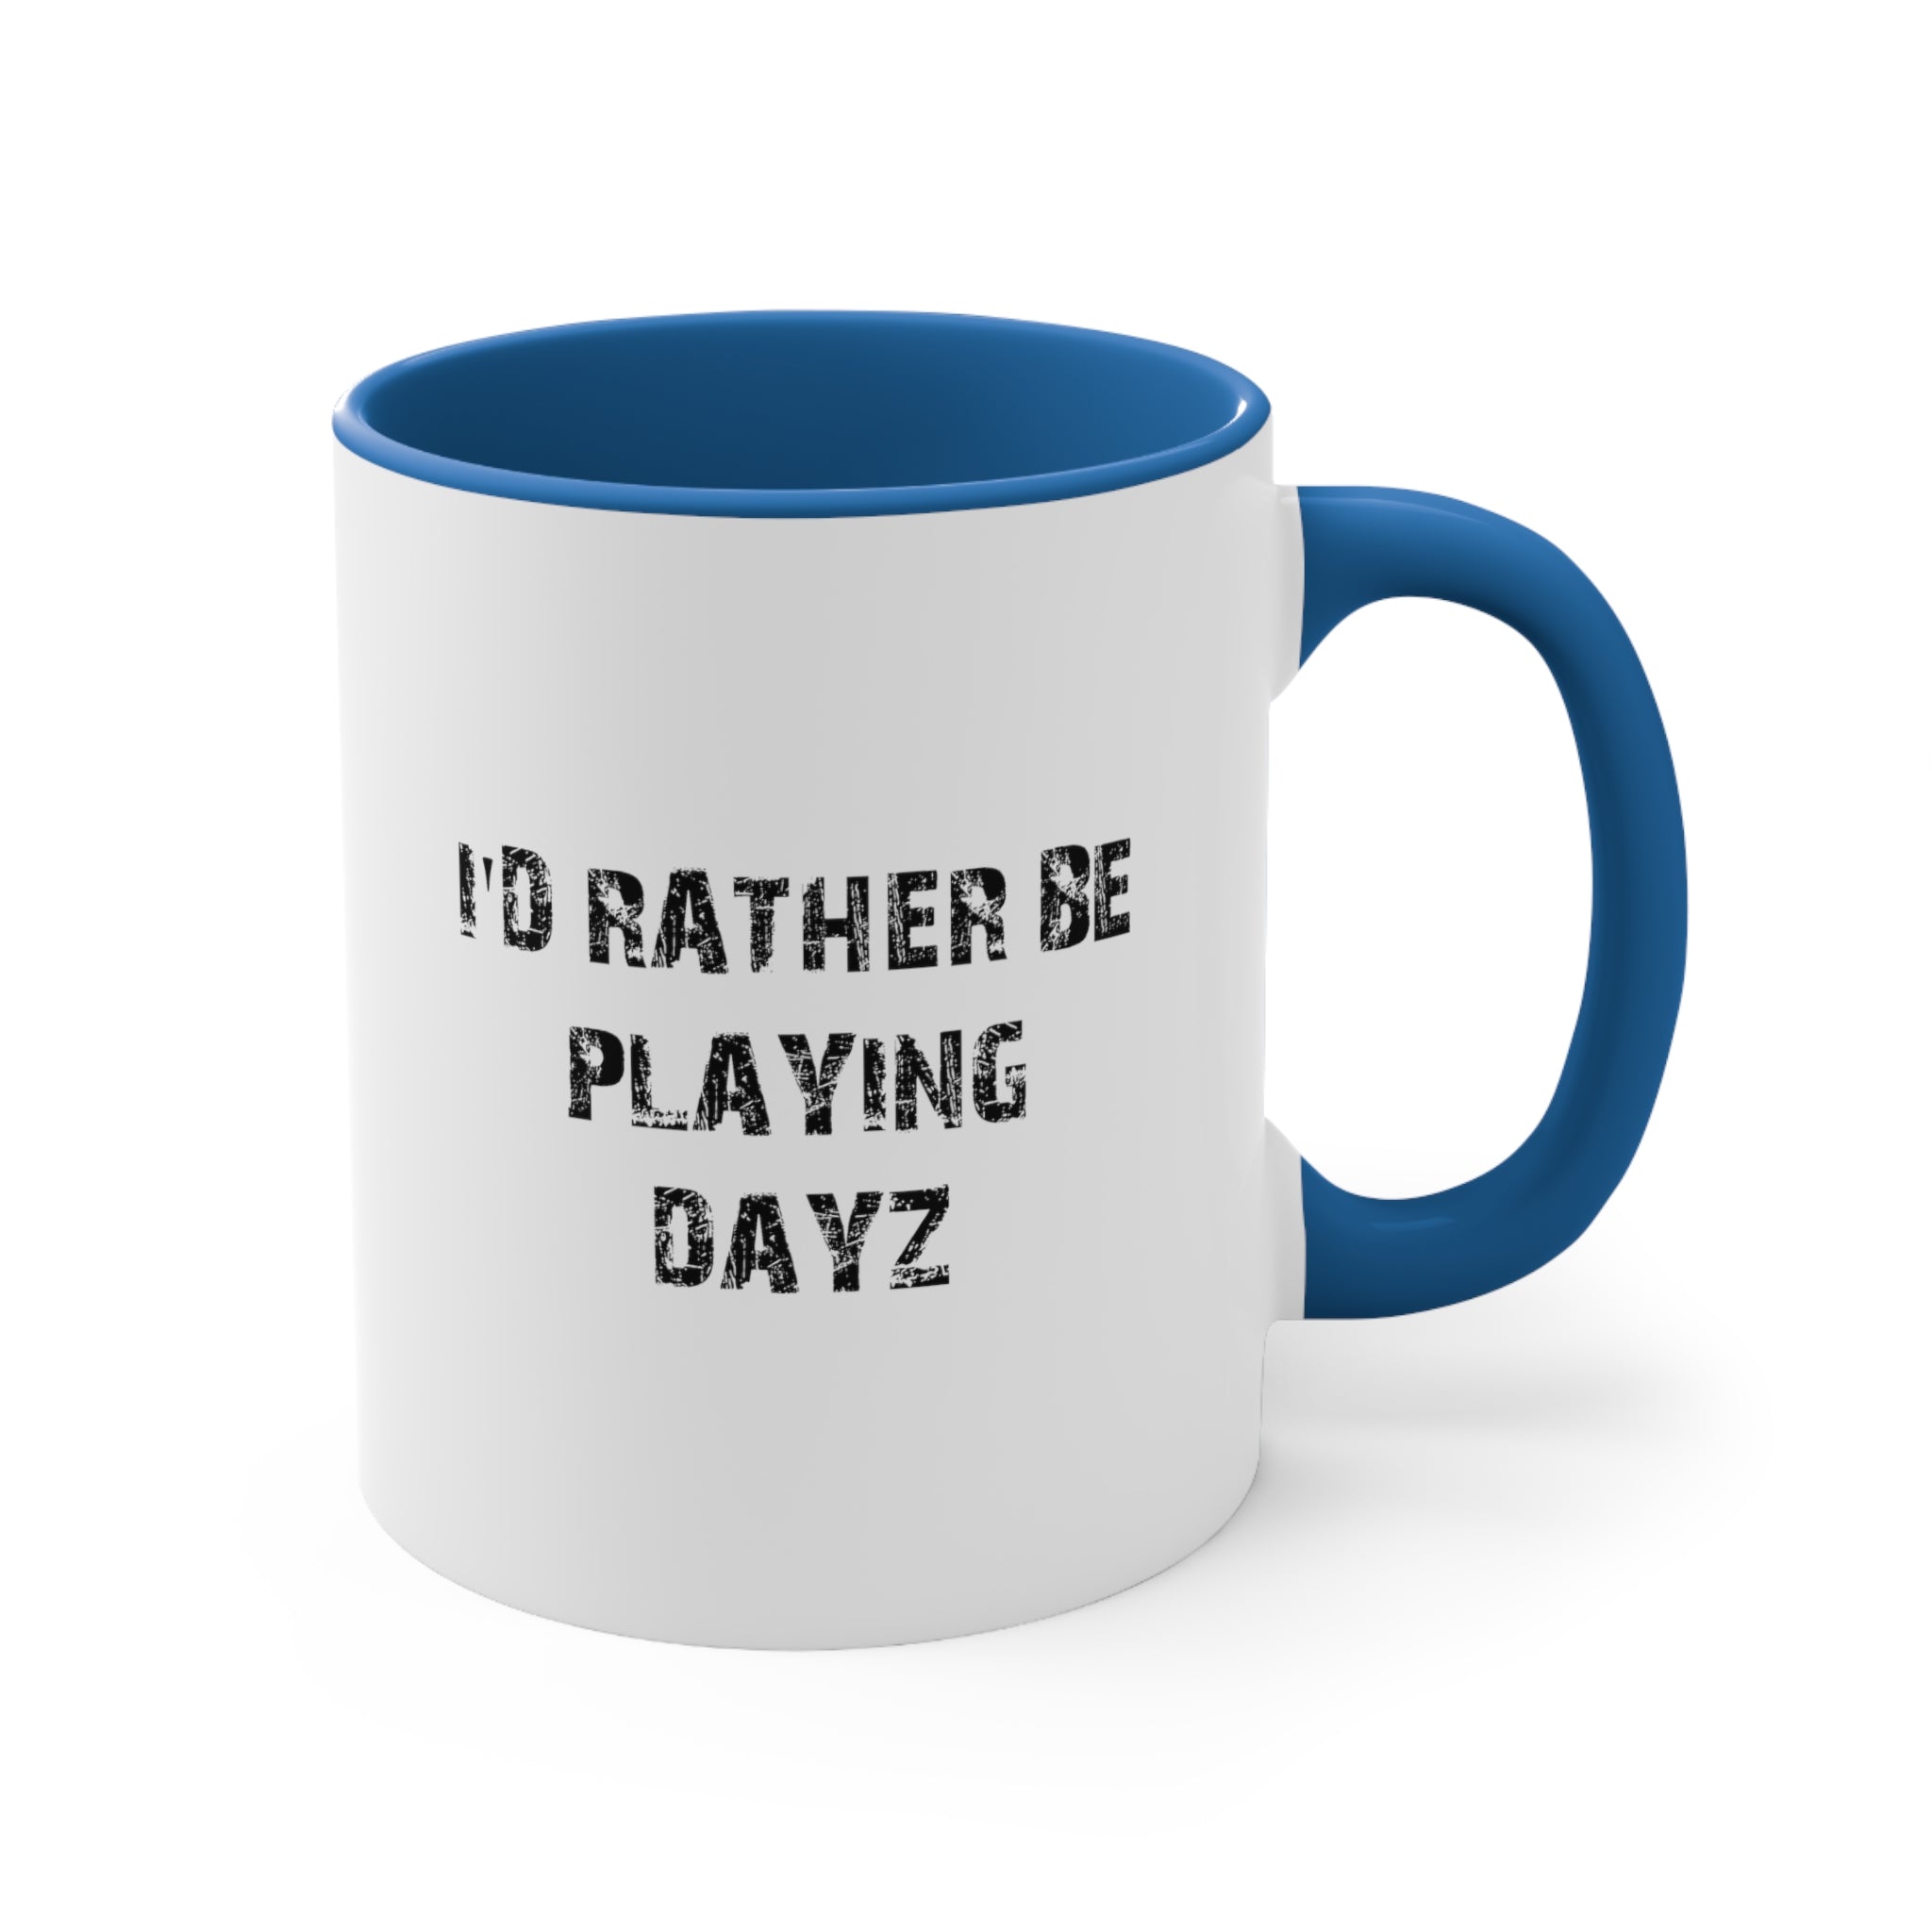 Dayz I'd Rather Be Playing Coffee Mug, 11oz cups mugs cup Gamer Gift For Him Her Game Cup Cups Mugs Birthday Christmas Valentine's Anniversary Gifts